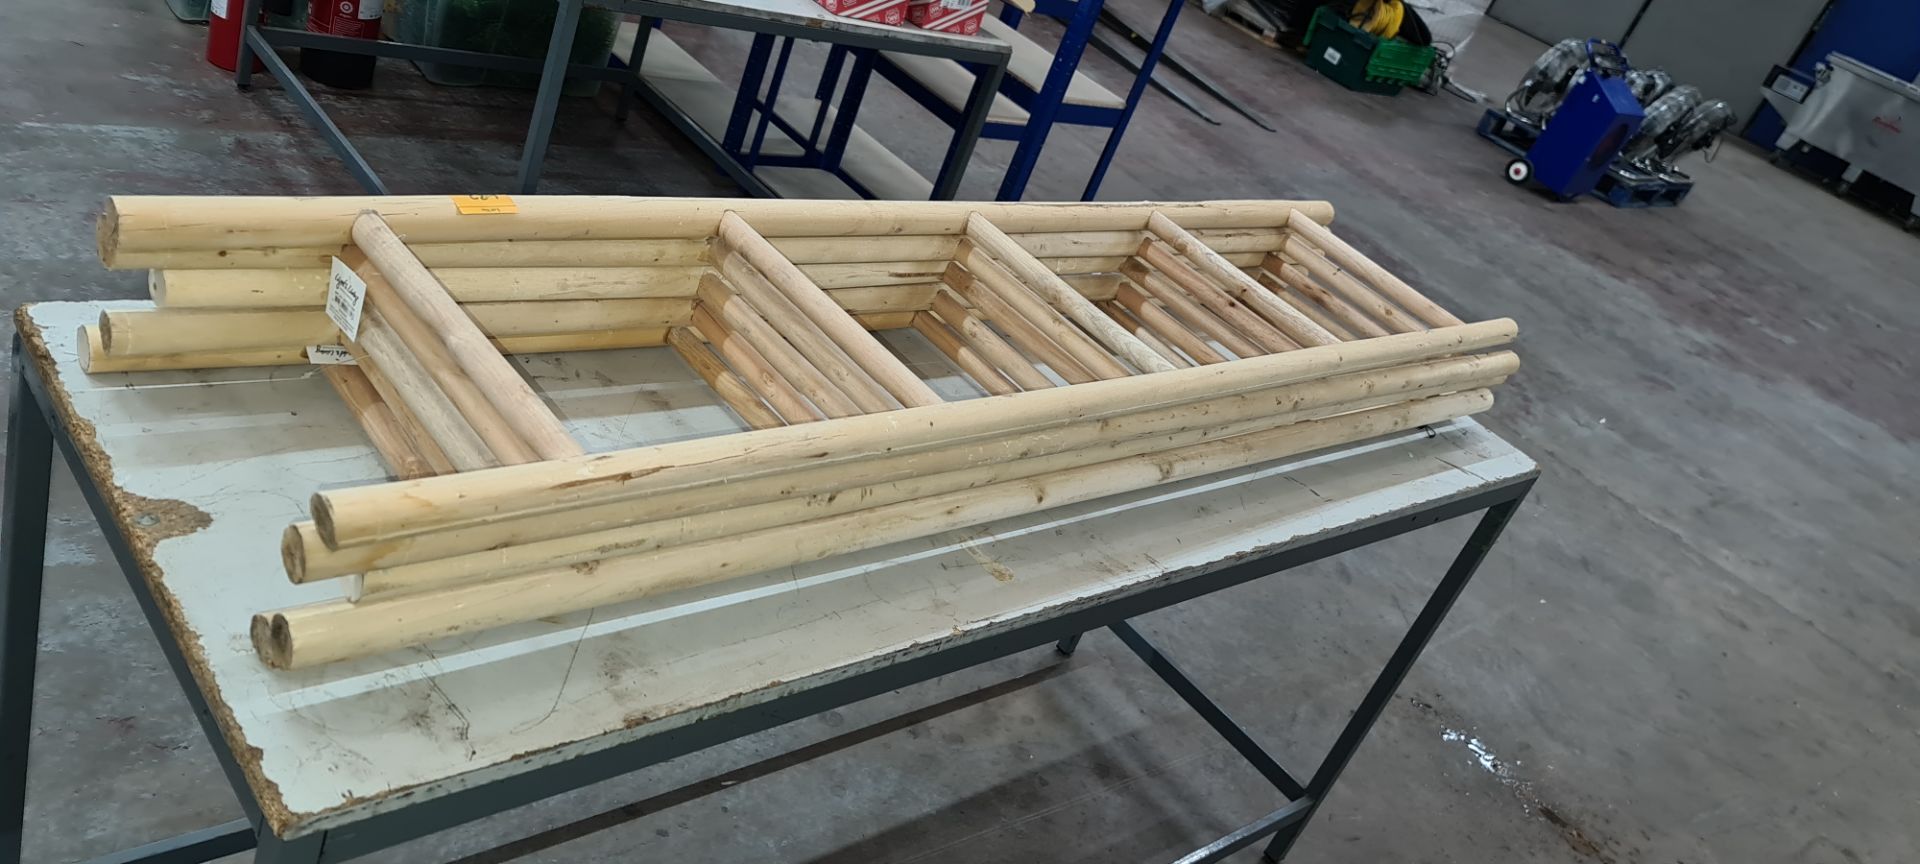 5 off wooden towel racks, each measuring circa 1600mm x 360mm, RRP understood to be £46 each - Image 3 of 4